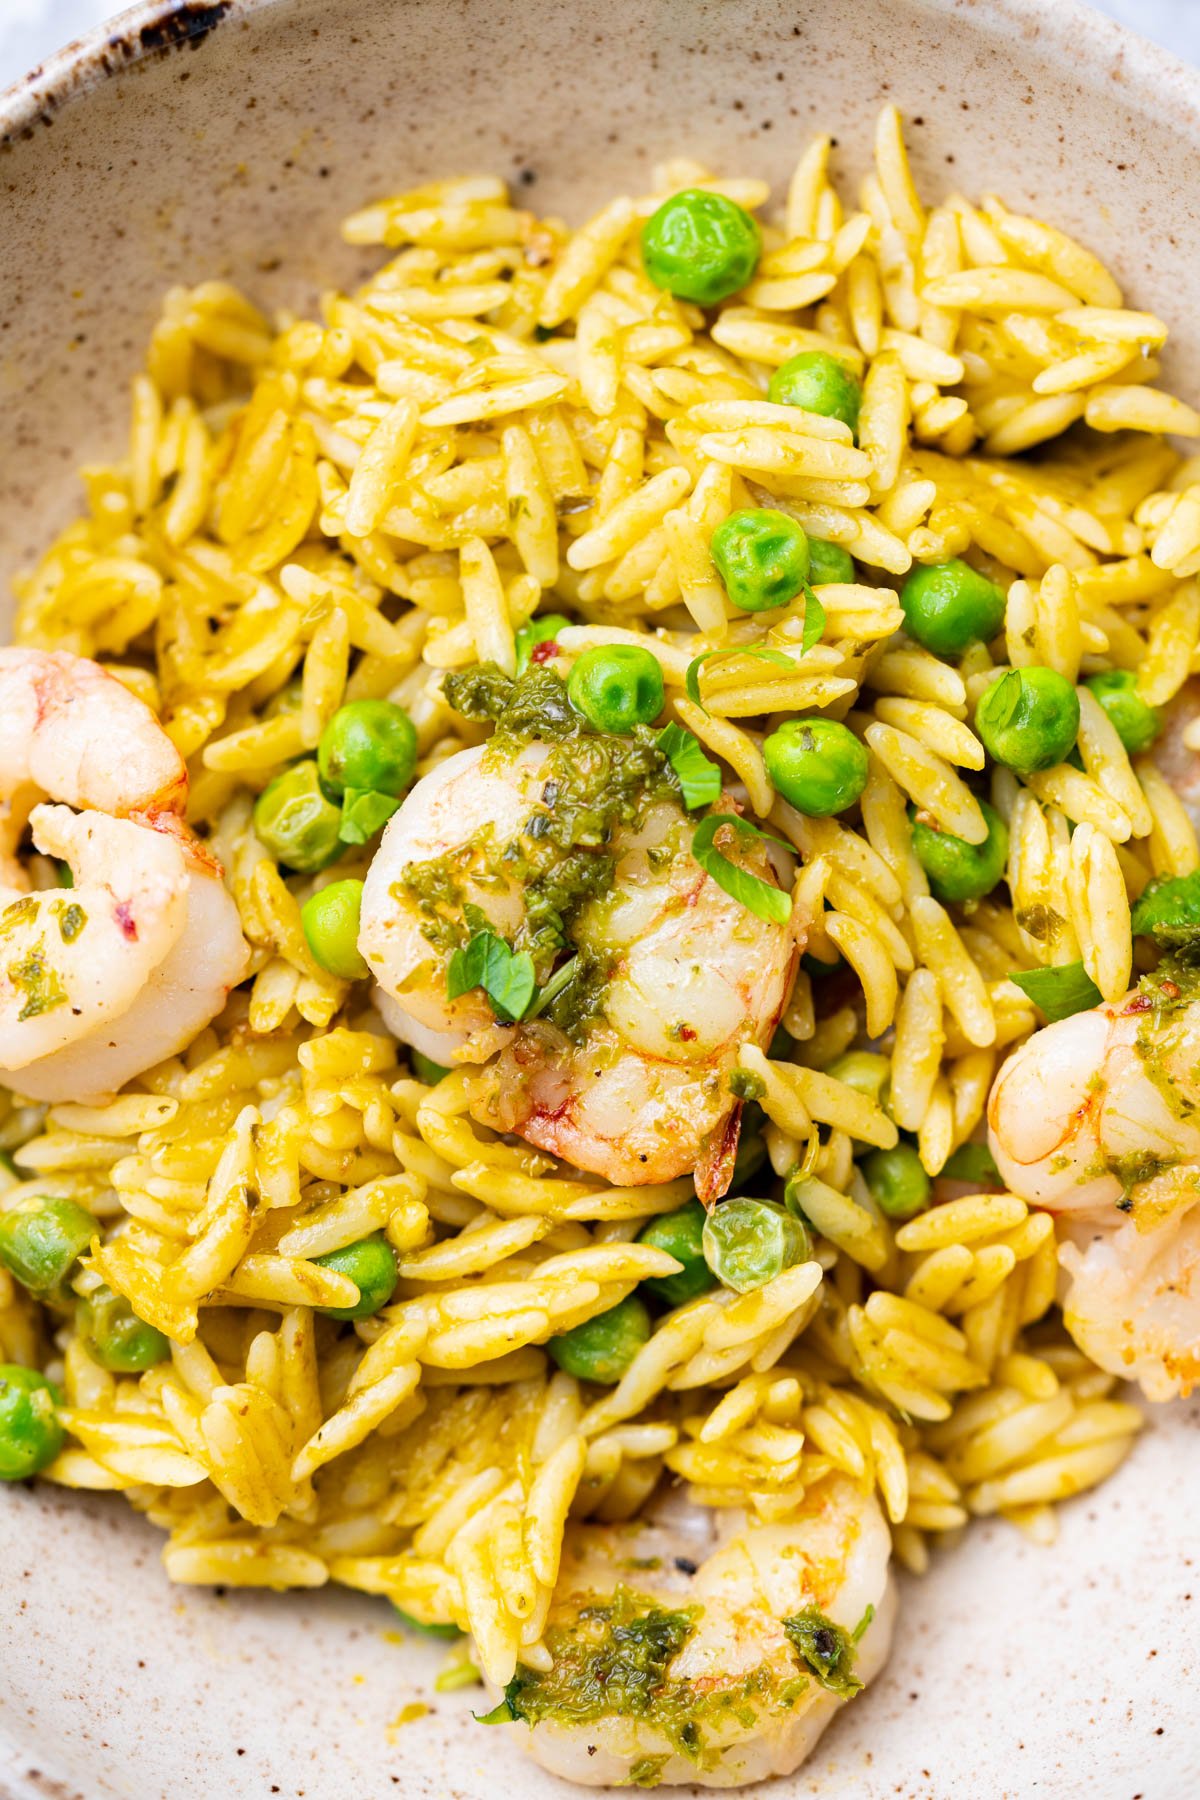 Orzo with chimichurri sauce, peas and shrimp on a bowl.